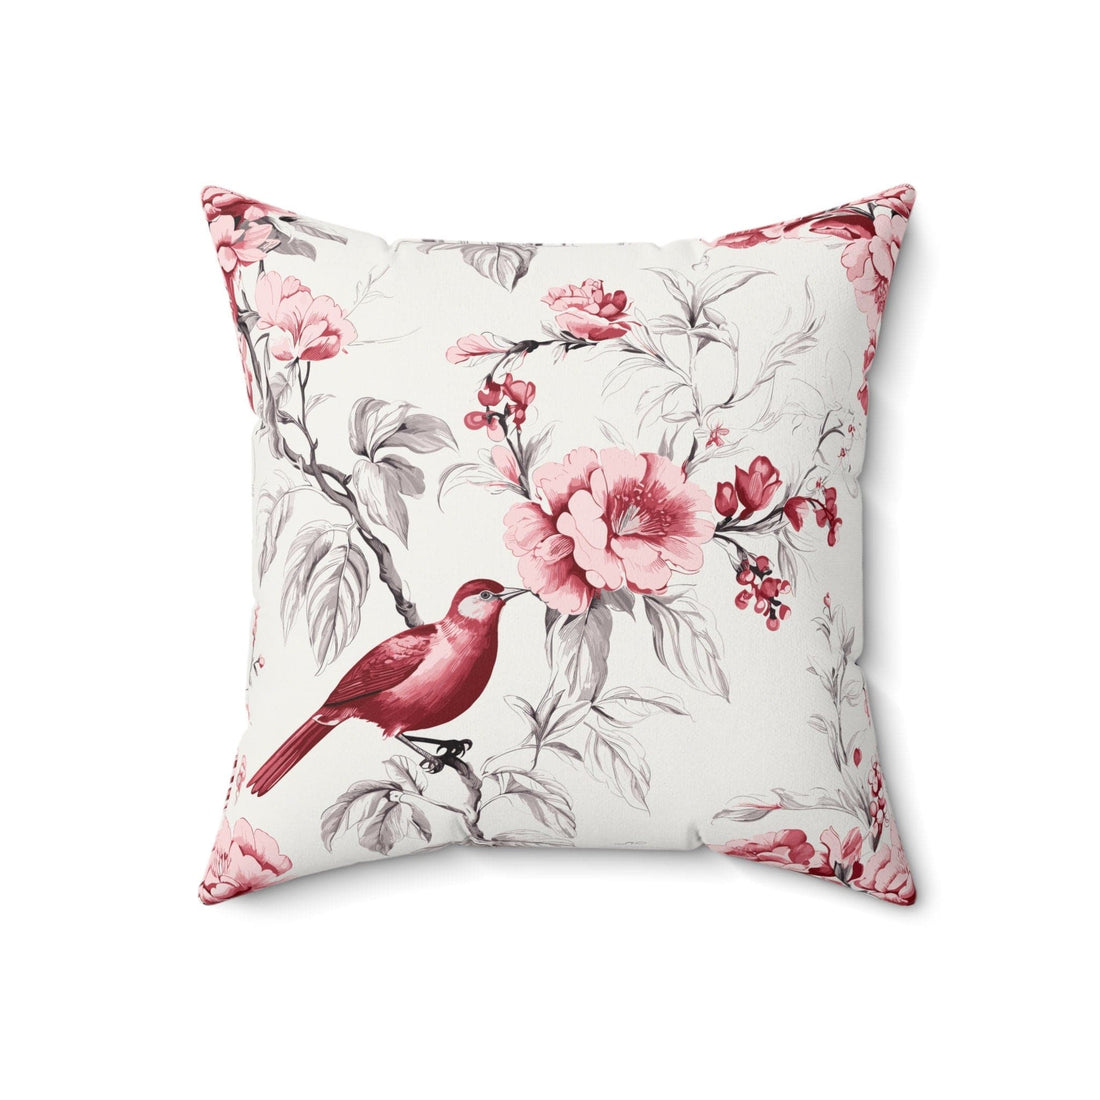 Kate McEnroe New York Chinoiserie Botanical Toile Floral Cranberry Red and White Throw Pillow, Country Farmhouse Living Room, Bedroom Decor - 132682823Throw Pillows21298929798385110964